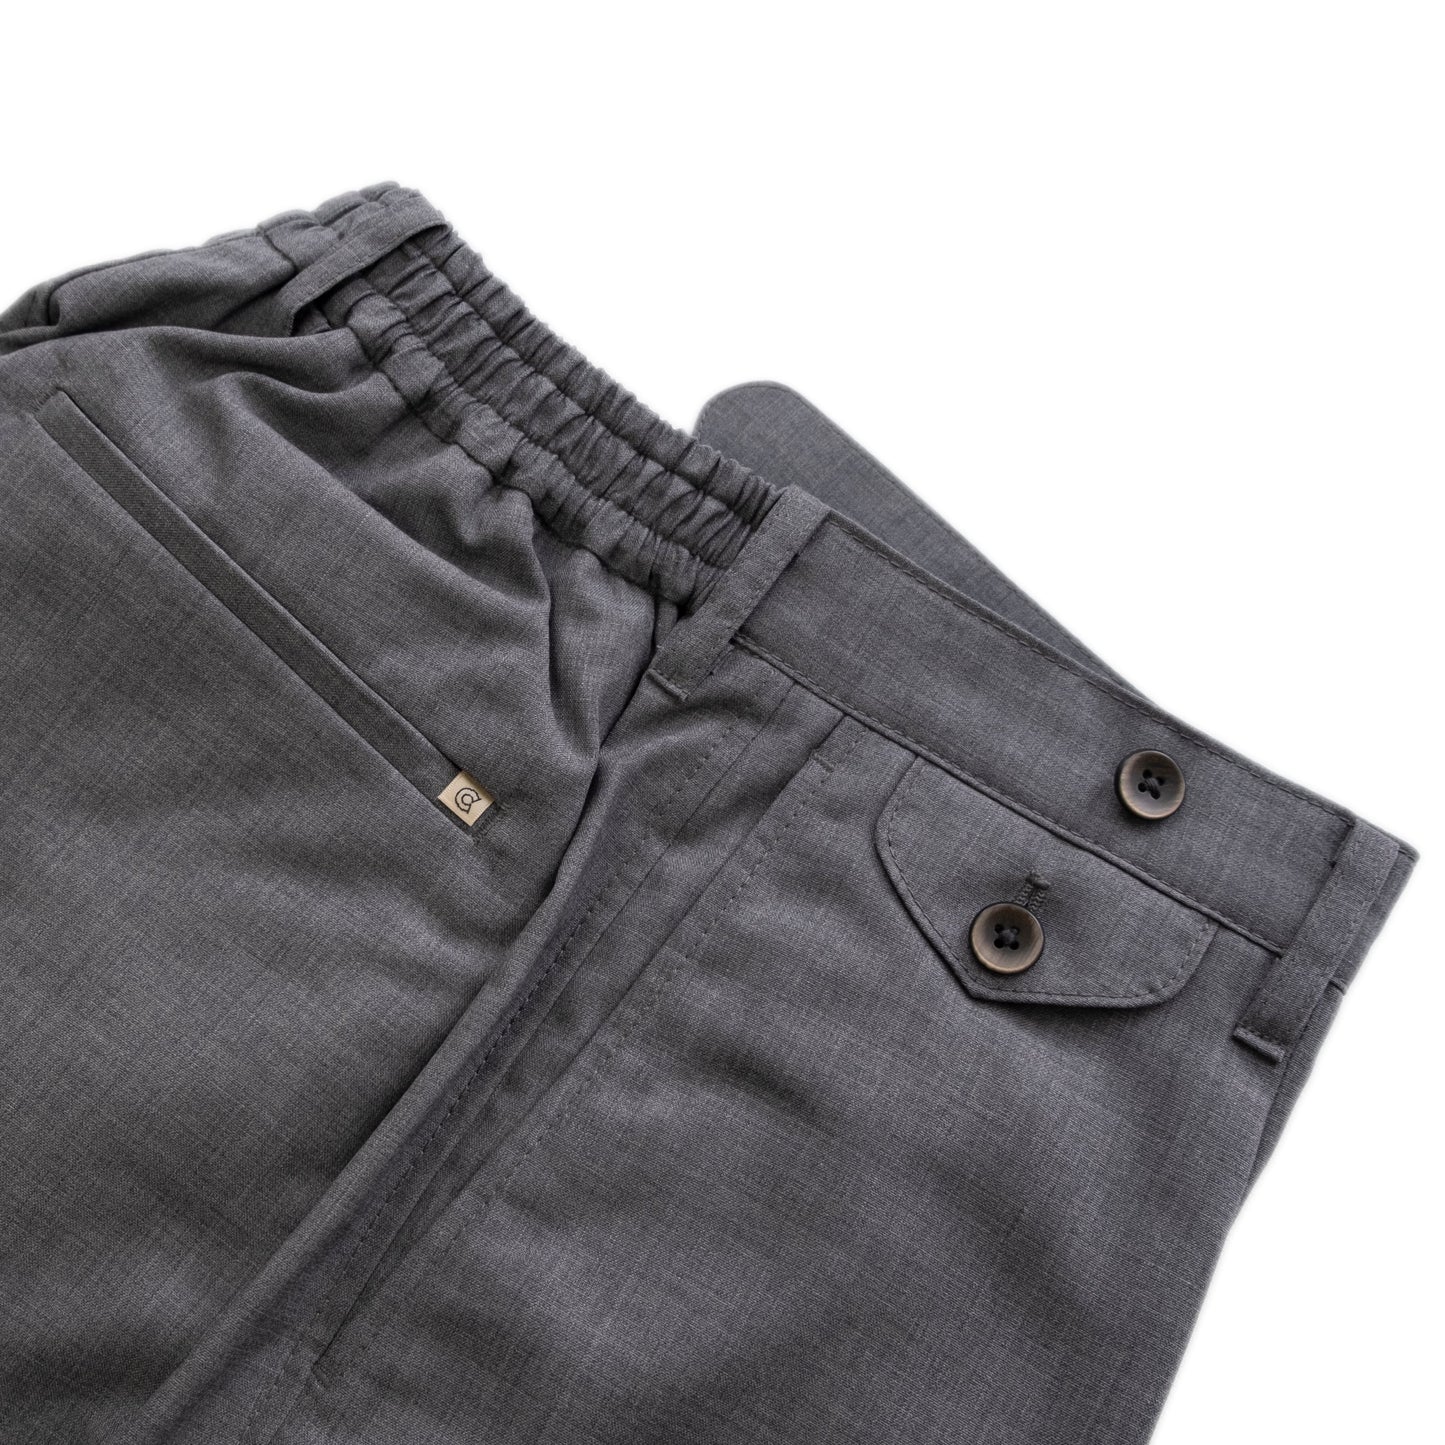 COLONY CLOTHING / ONE PLEAT TROUSERS TECH WOOL  / CC21-PT01-3